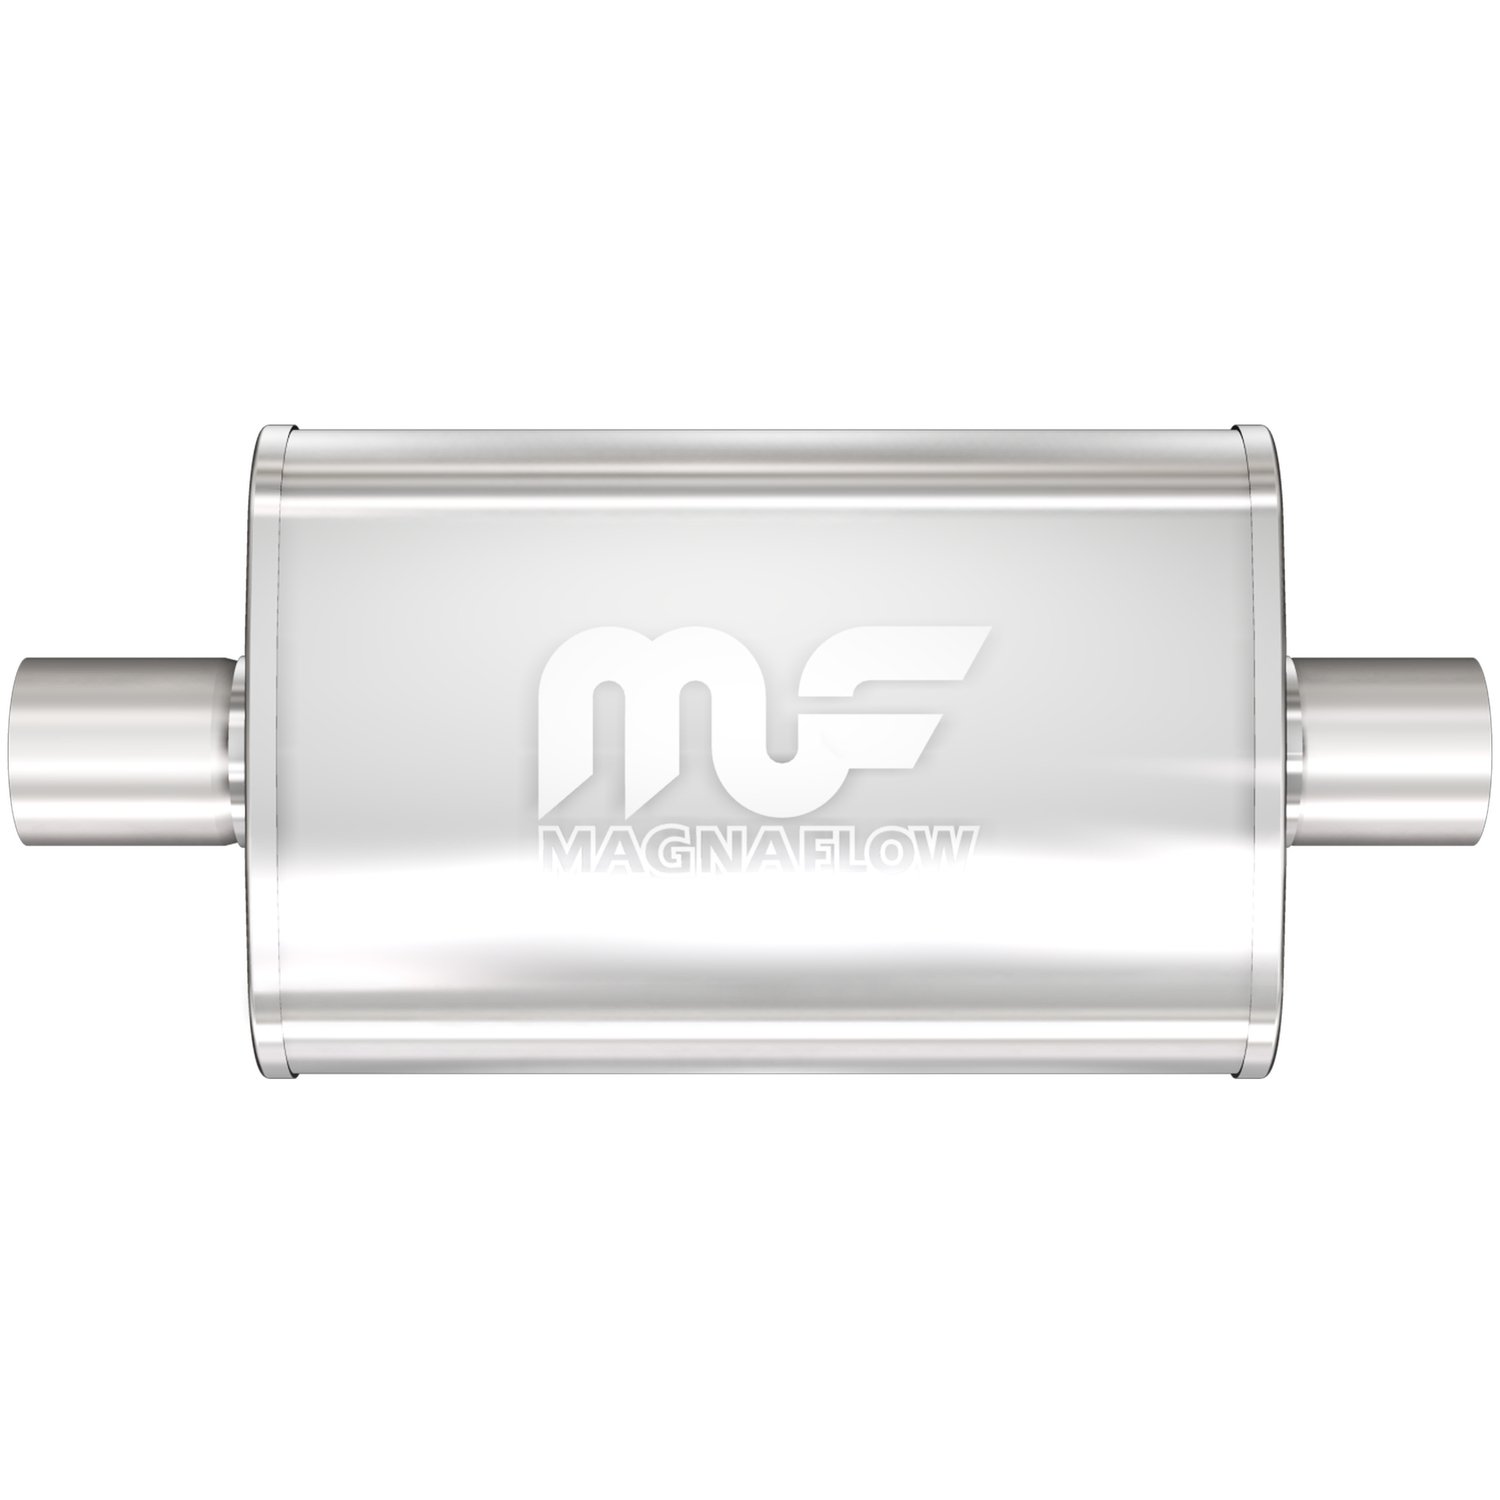 4" x 9" Oval Muffler Center In/Center Out: 2.5"/2.5" Body Length: 18" Overall Length: 24" Core Size: 2.5" Satin Finish